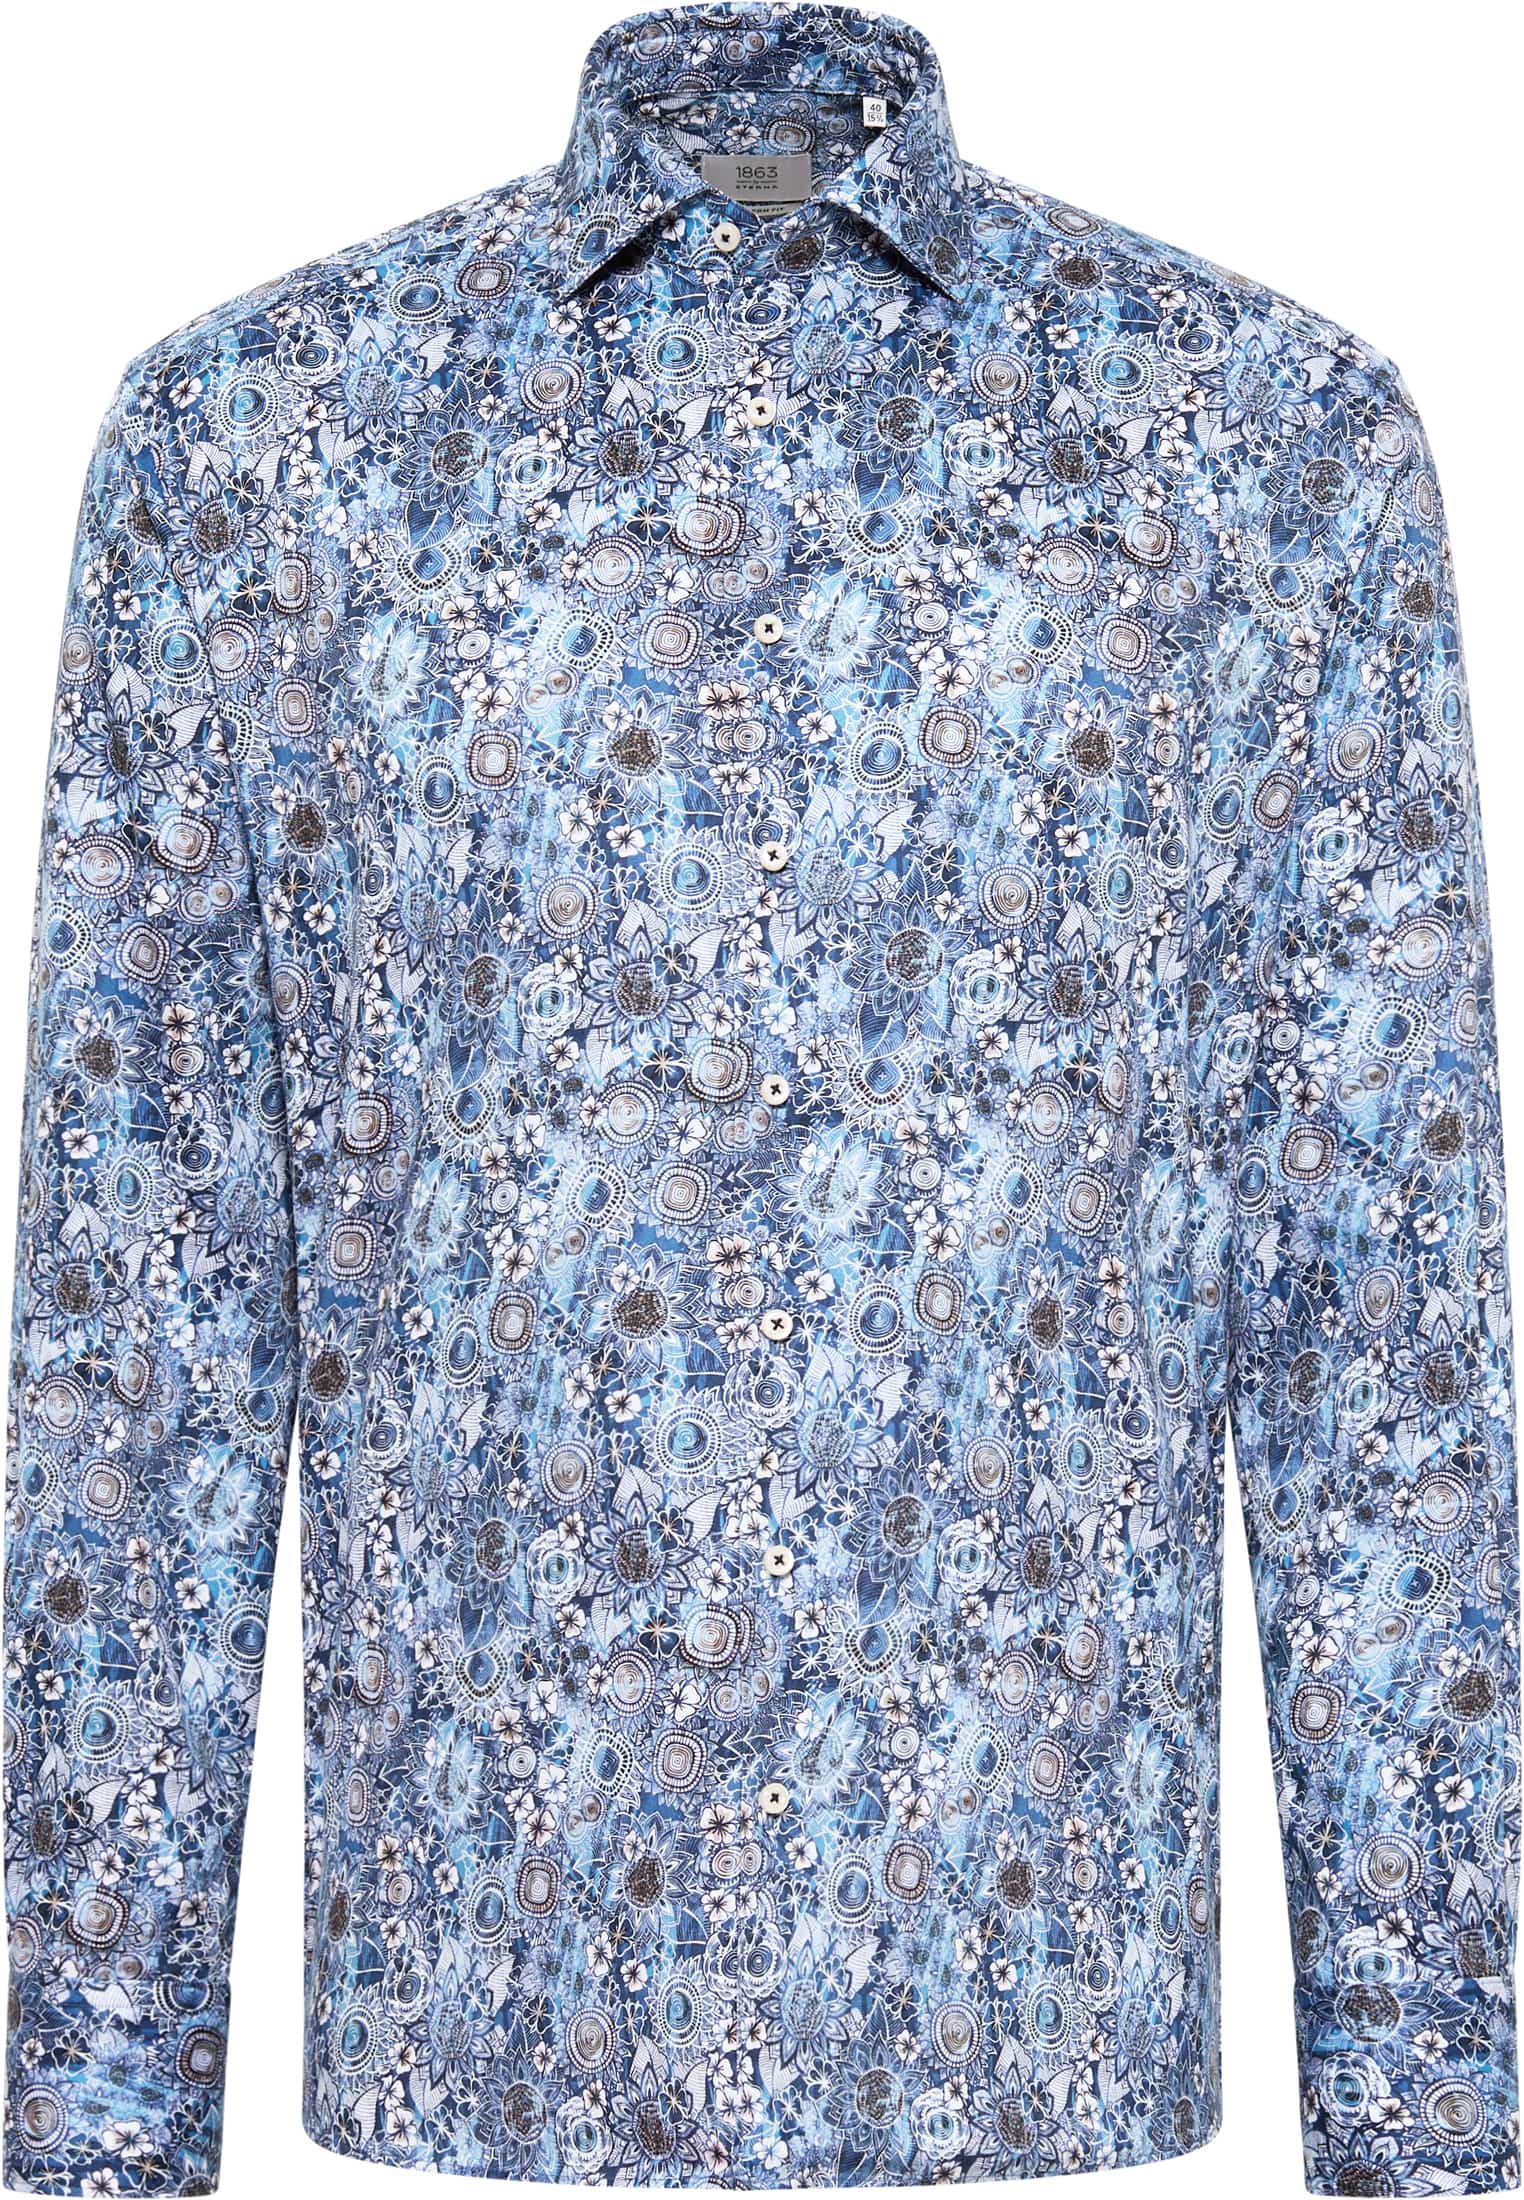 MODERN FIT Shirt in azure printed